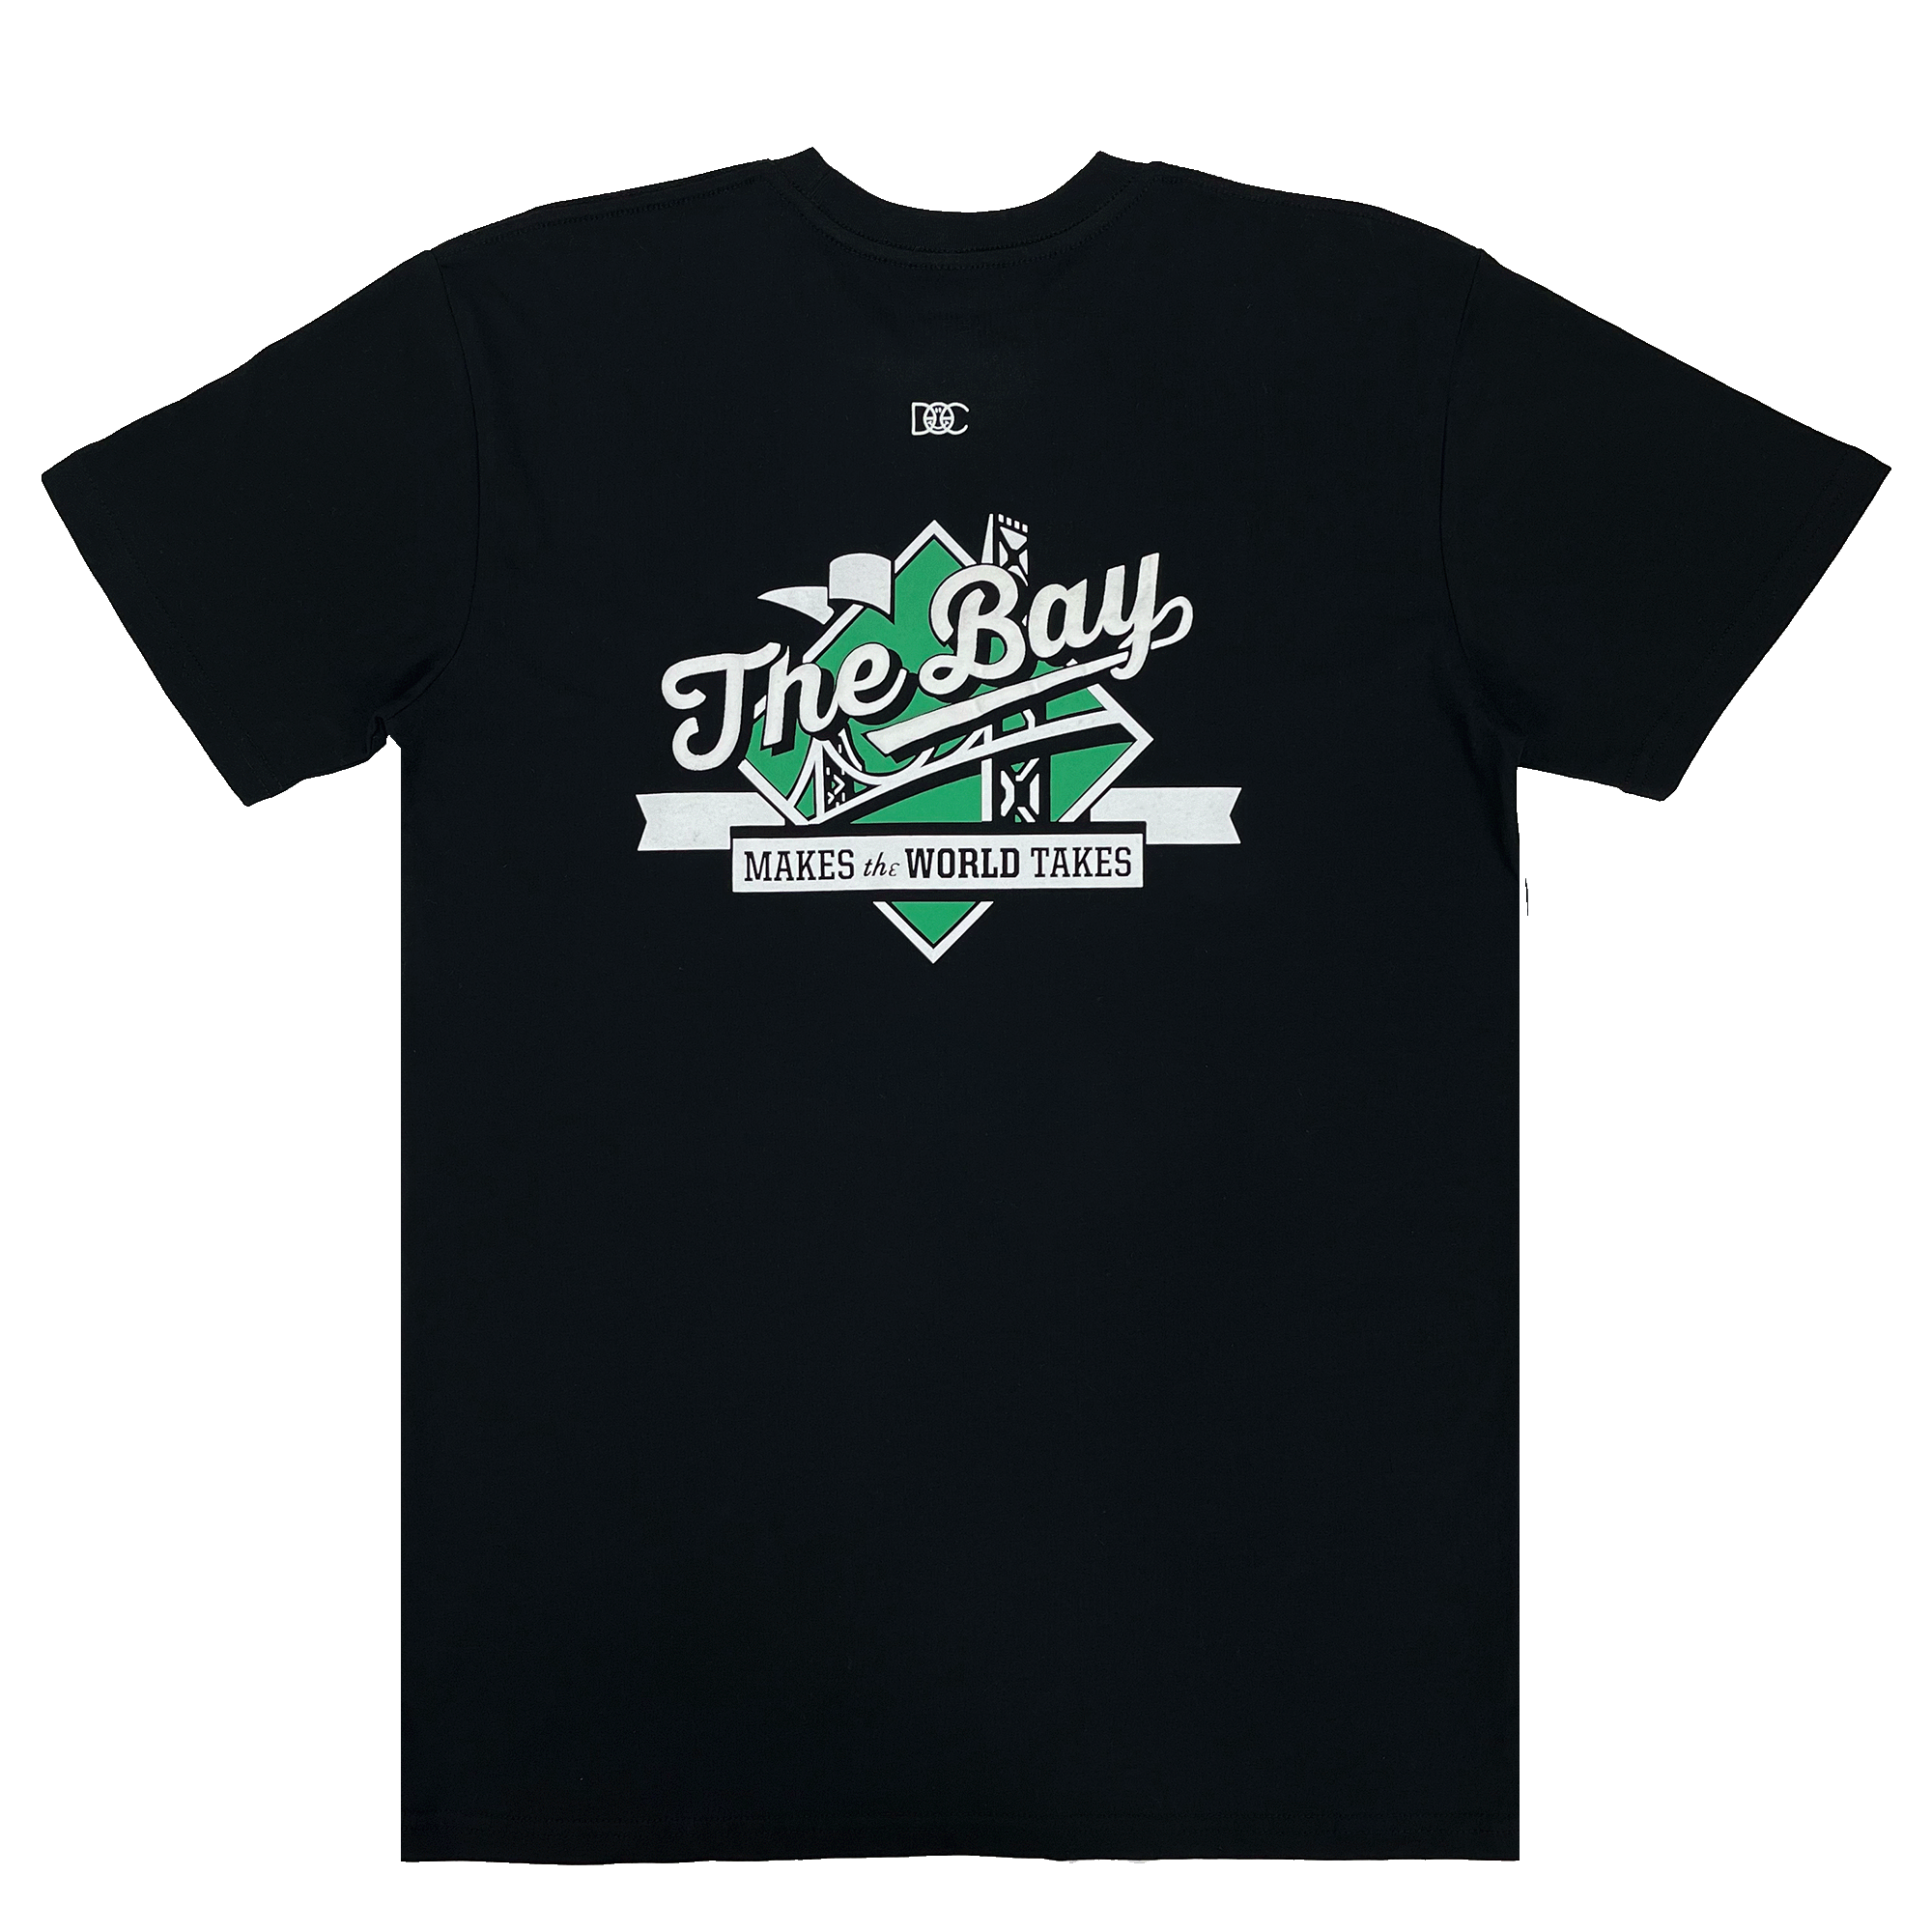 Backside view of a black t-shirt with The Bay Makes The World Takes green and white logo graphic..